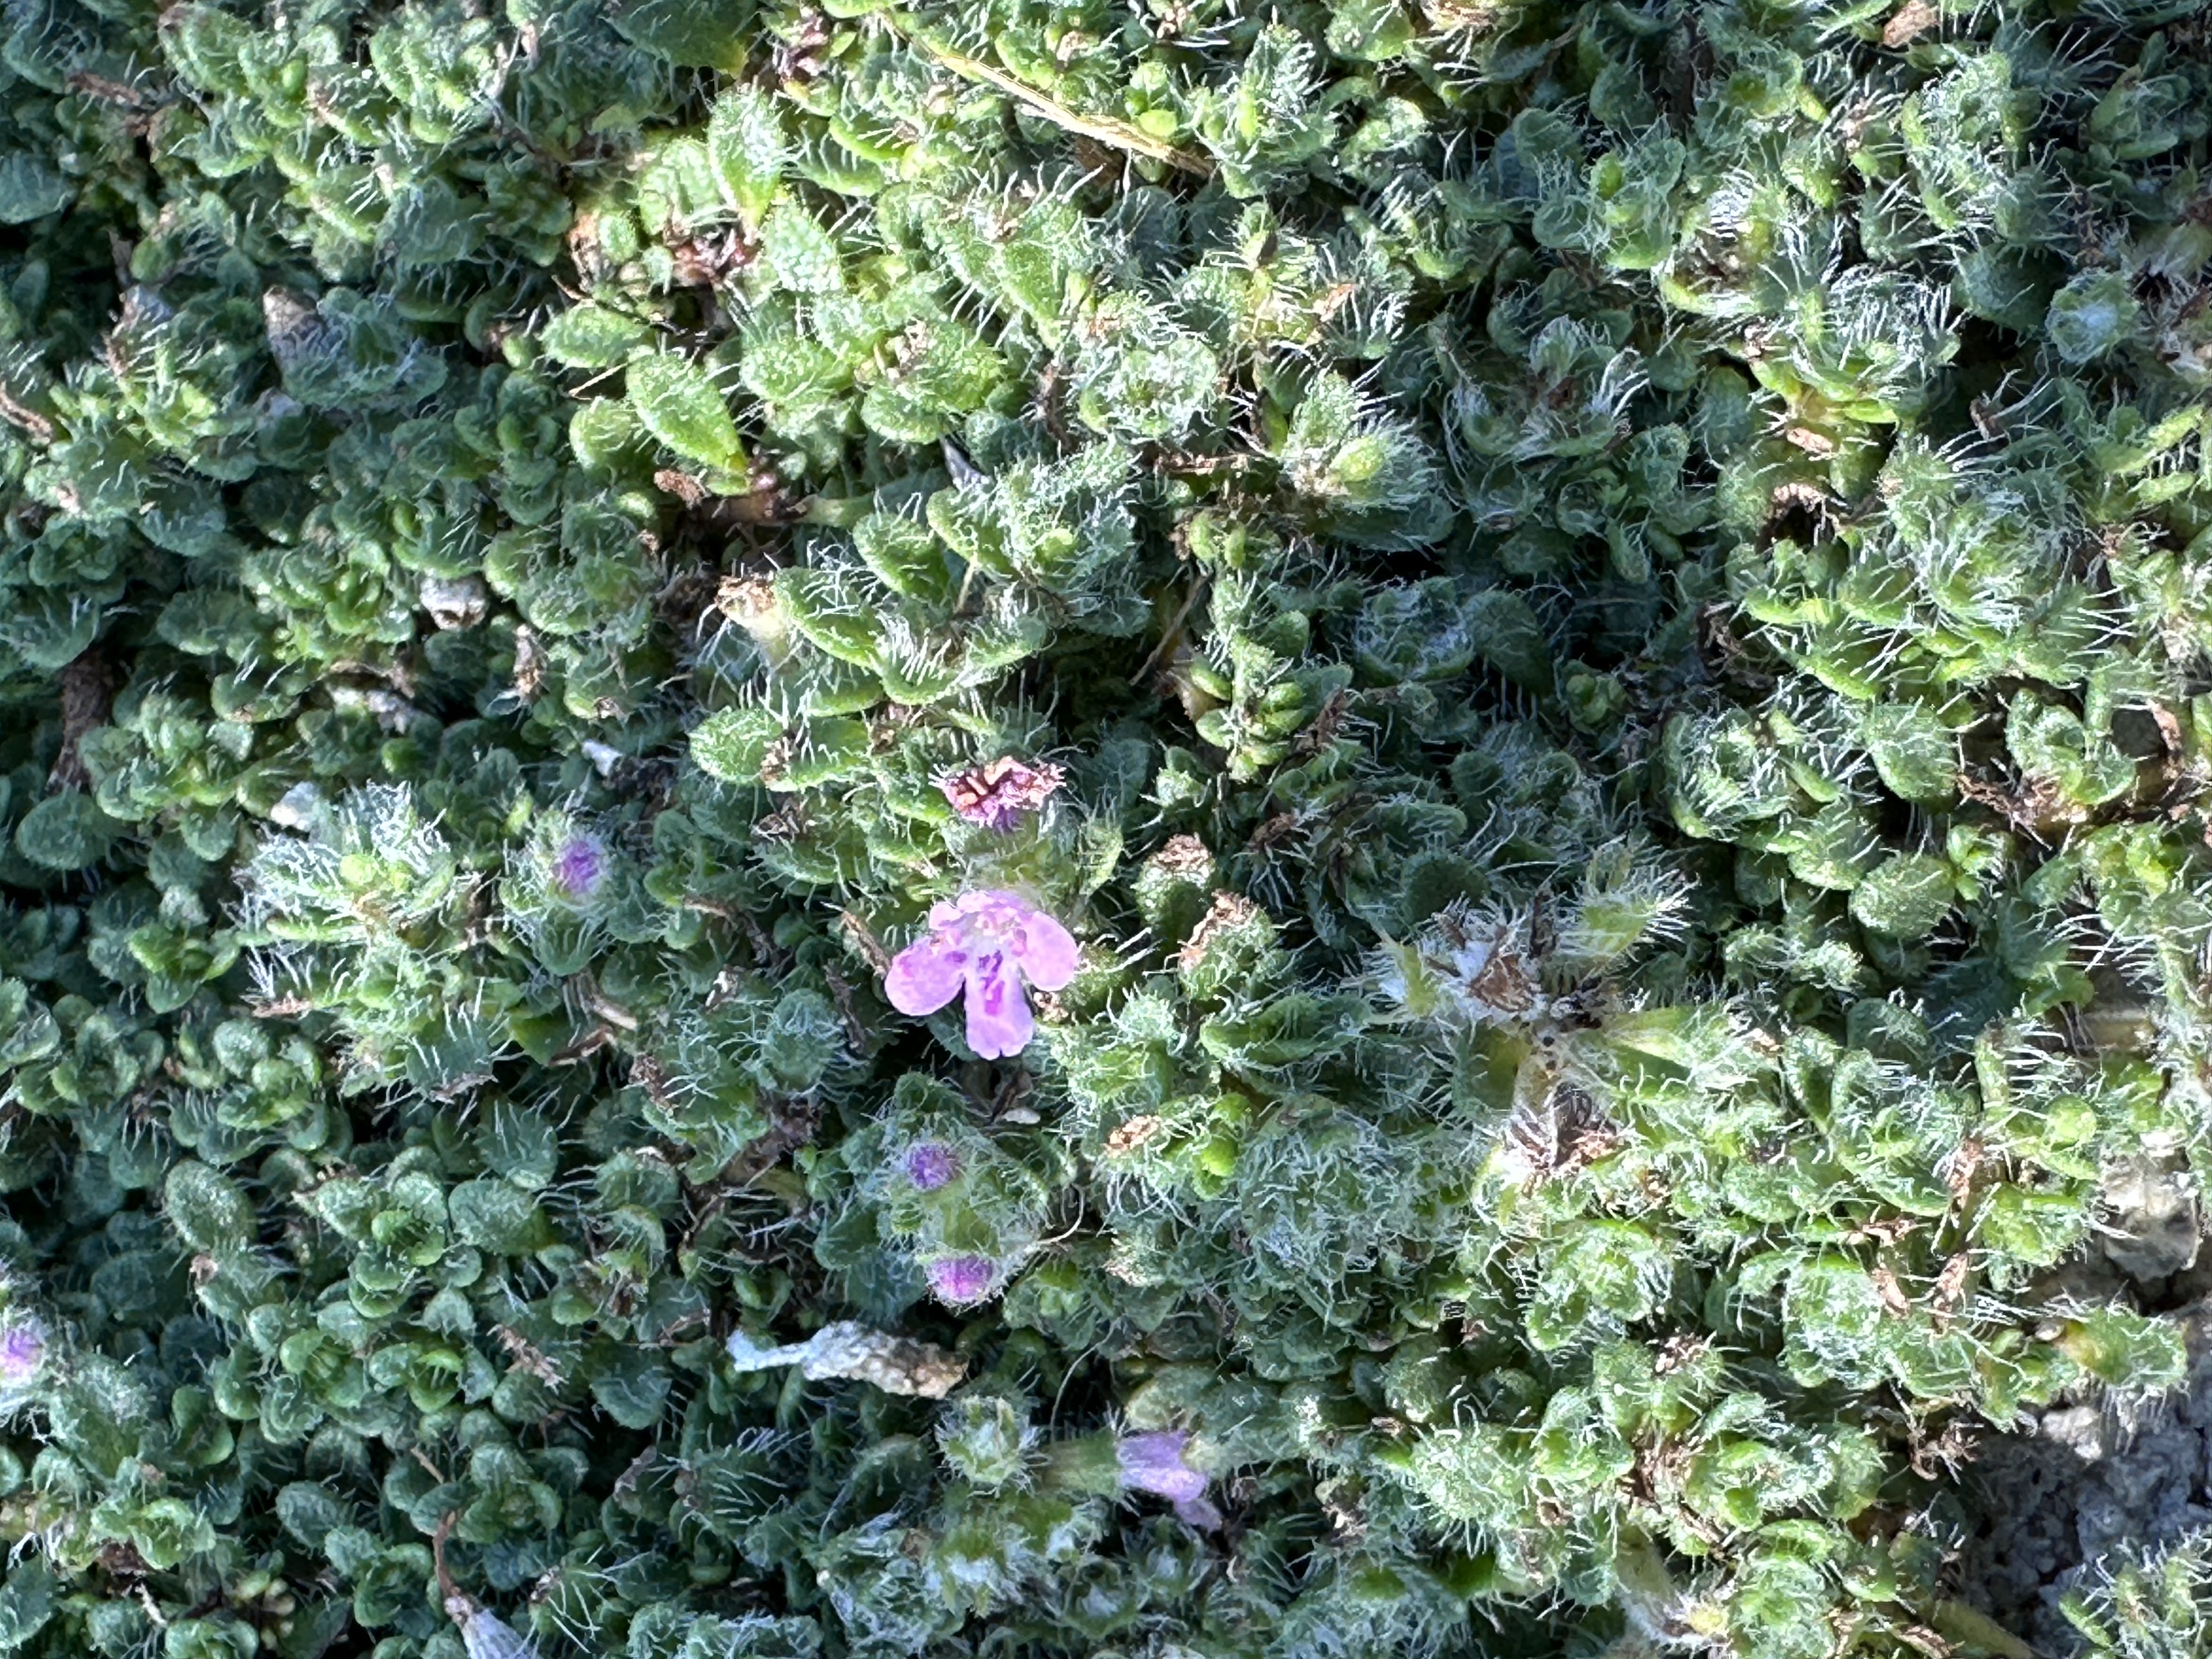 Creeping Thyme has tiny fuzzy leaves with tiny purple flowers.